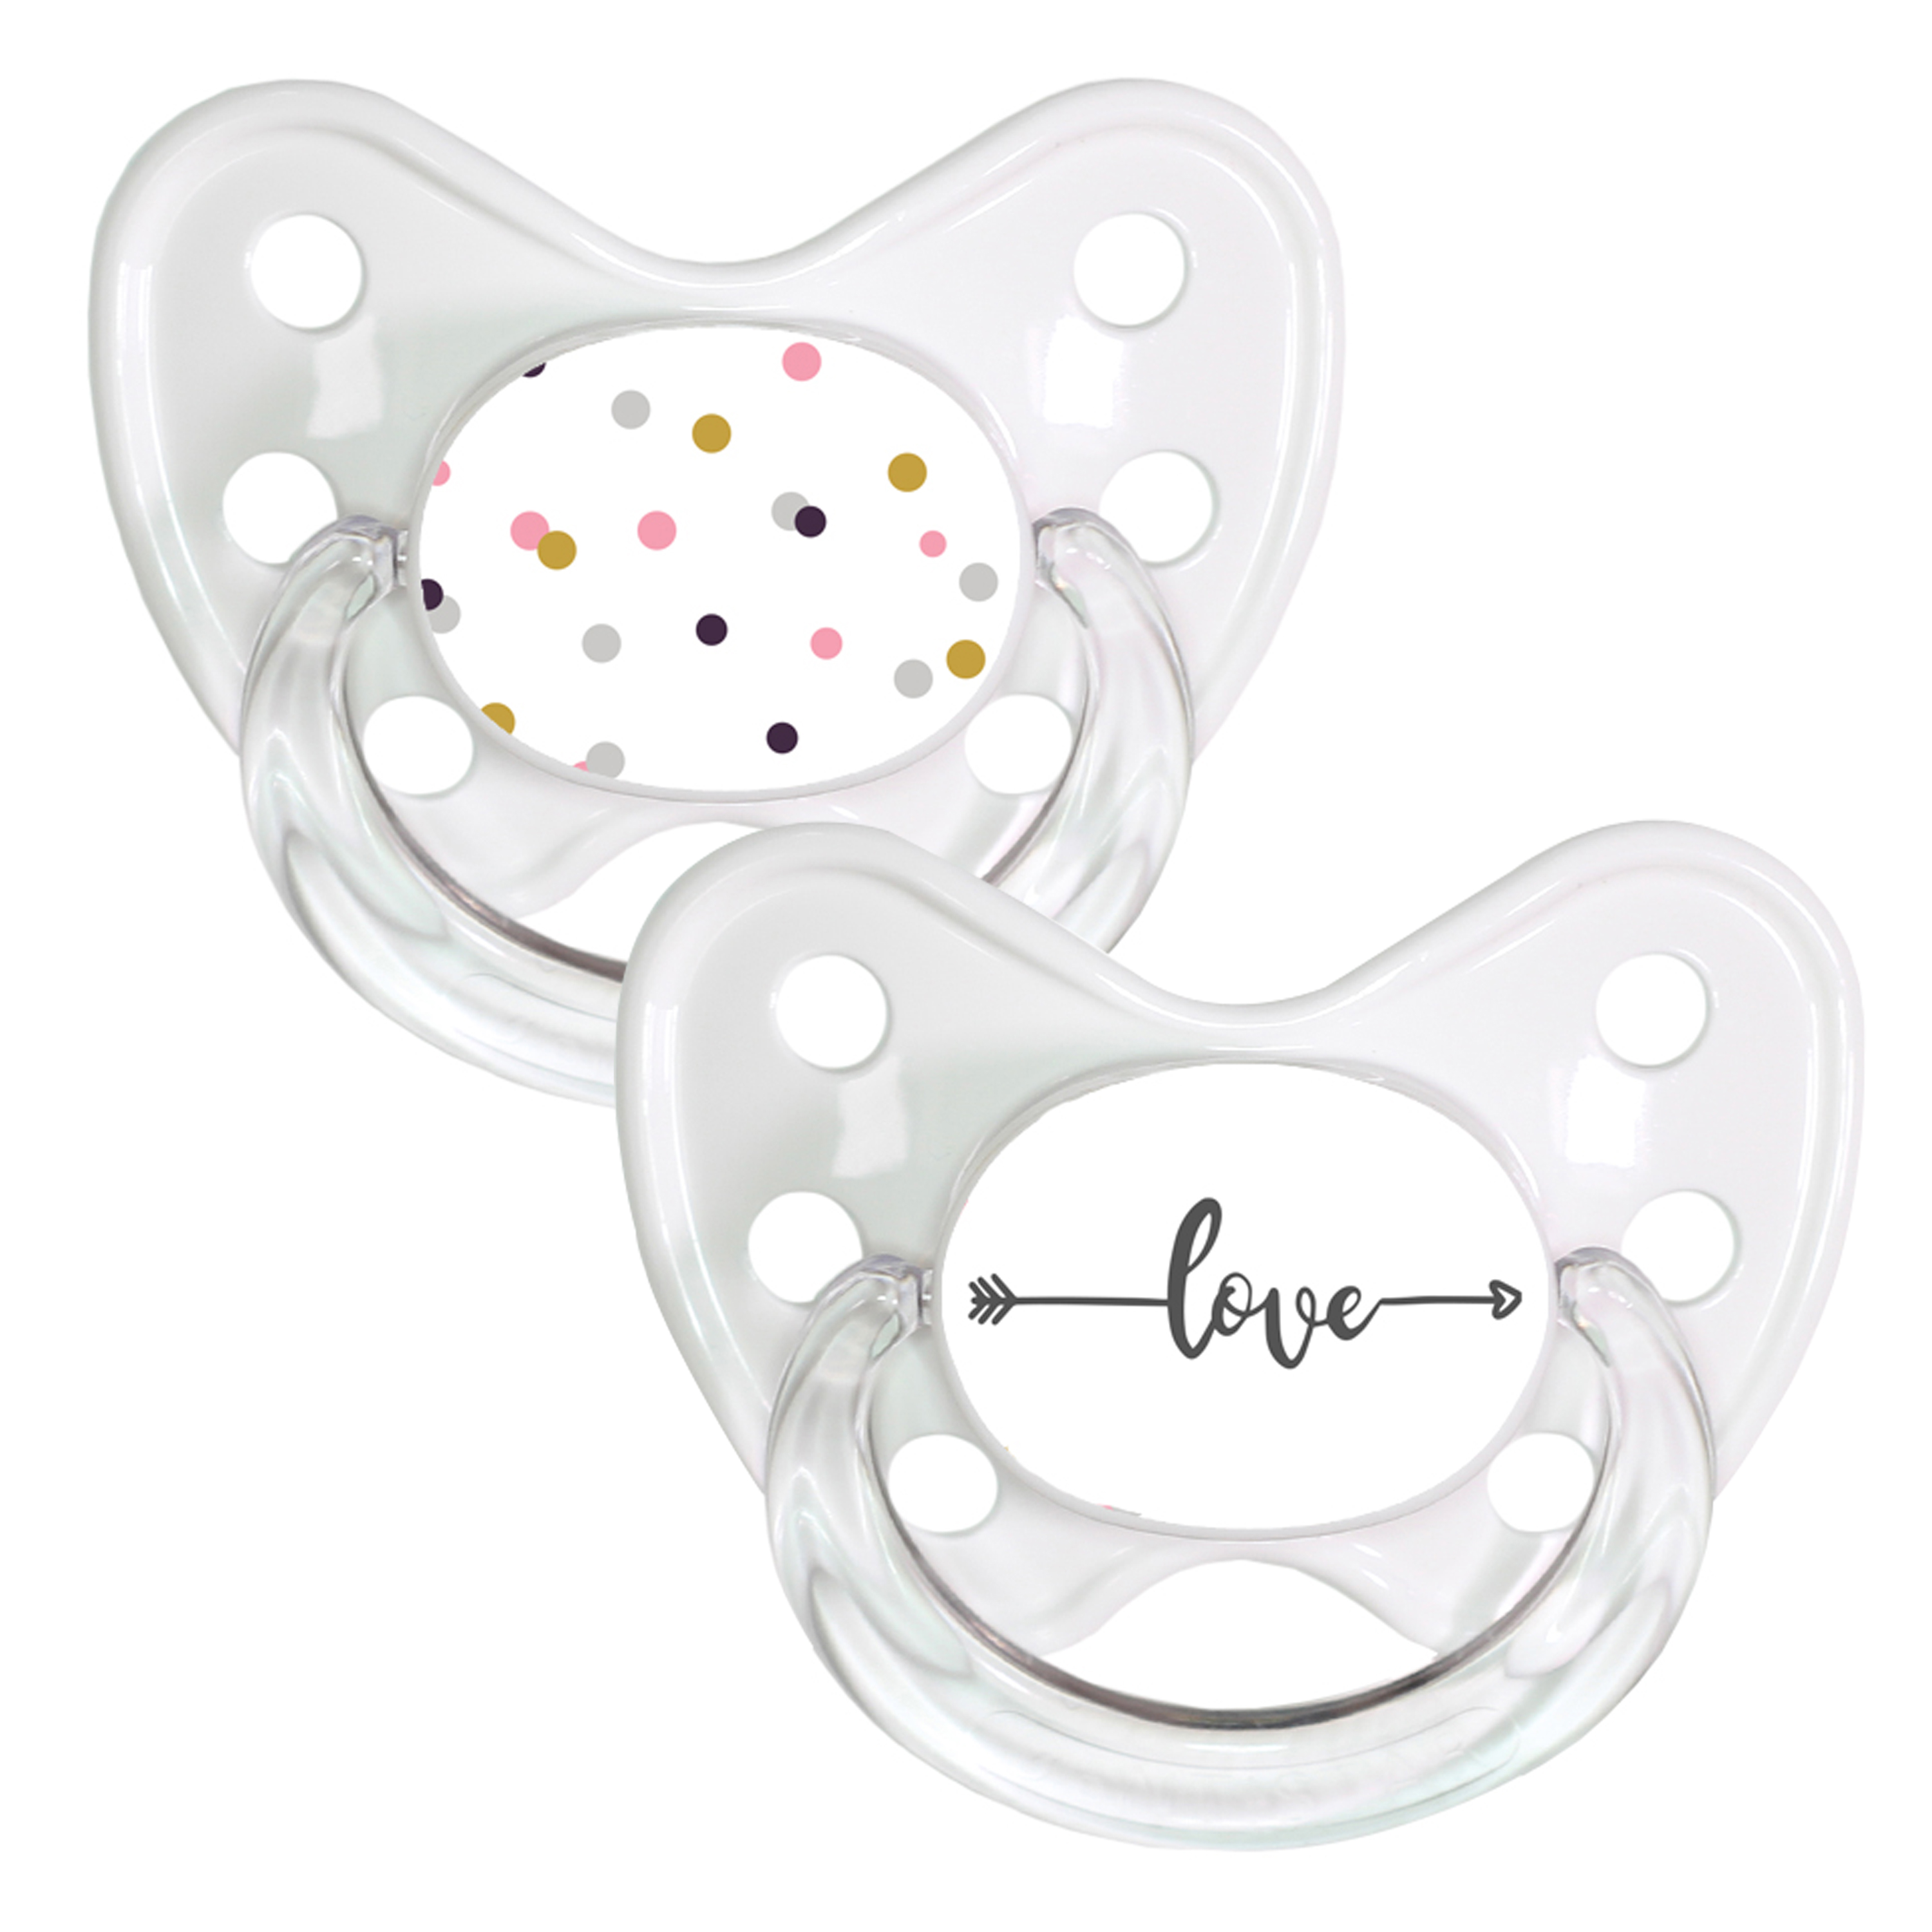 Soother Set size 3 Dots & Love